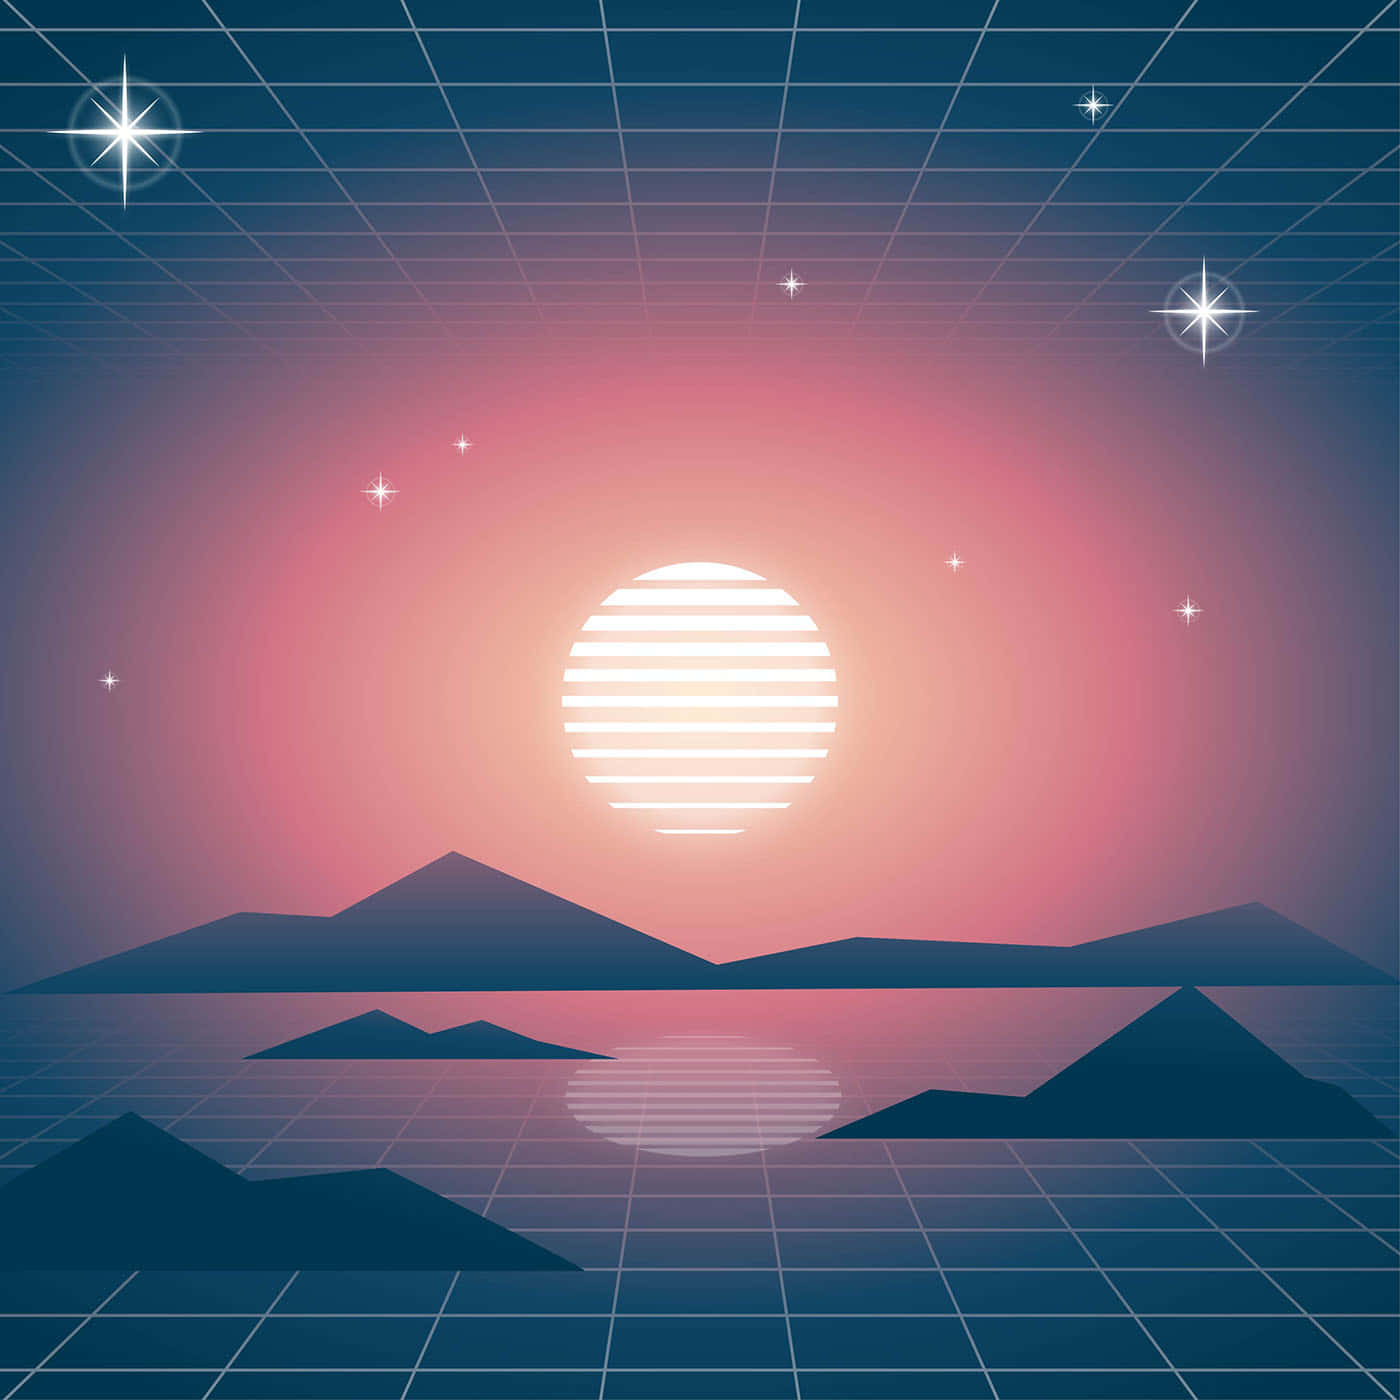 Download A Retro Style Landscape With Mountains And A Sun | Wallpapers.com